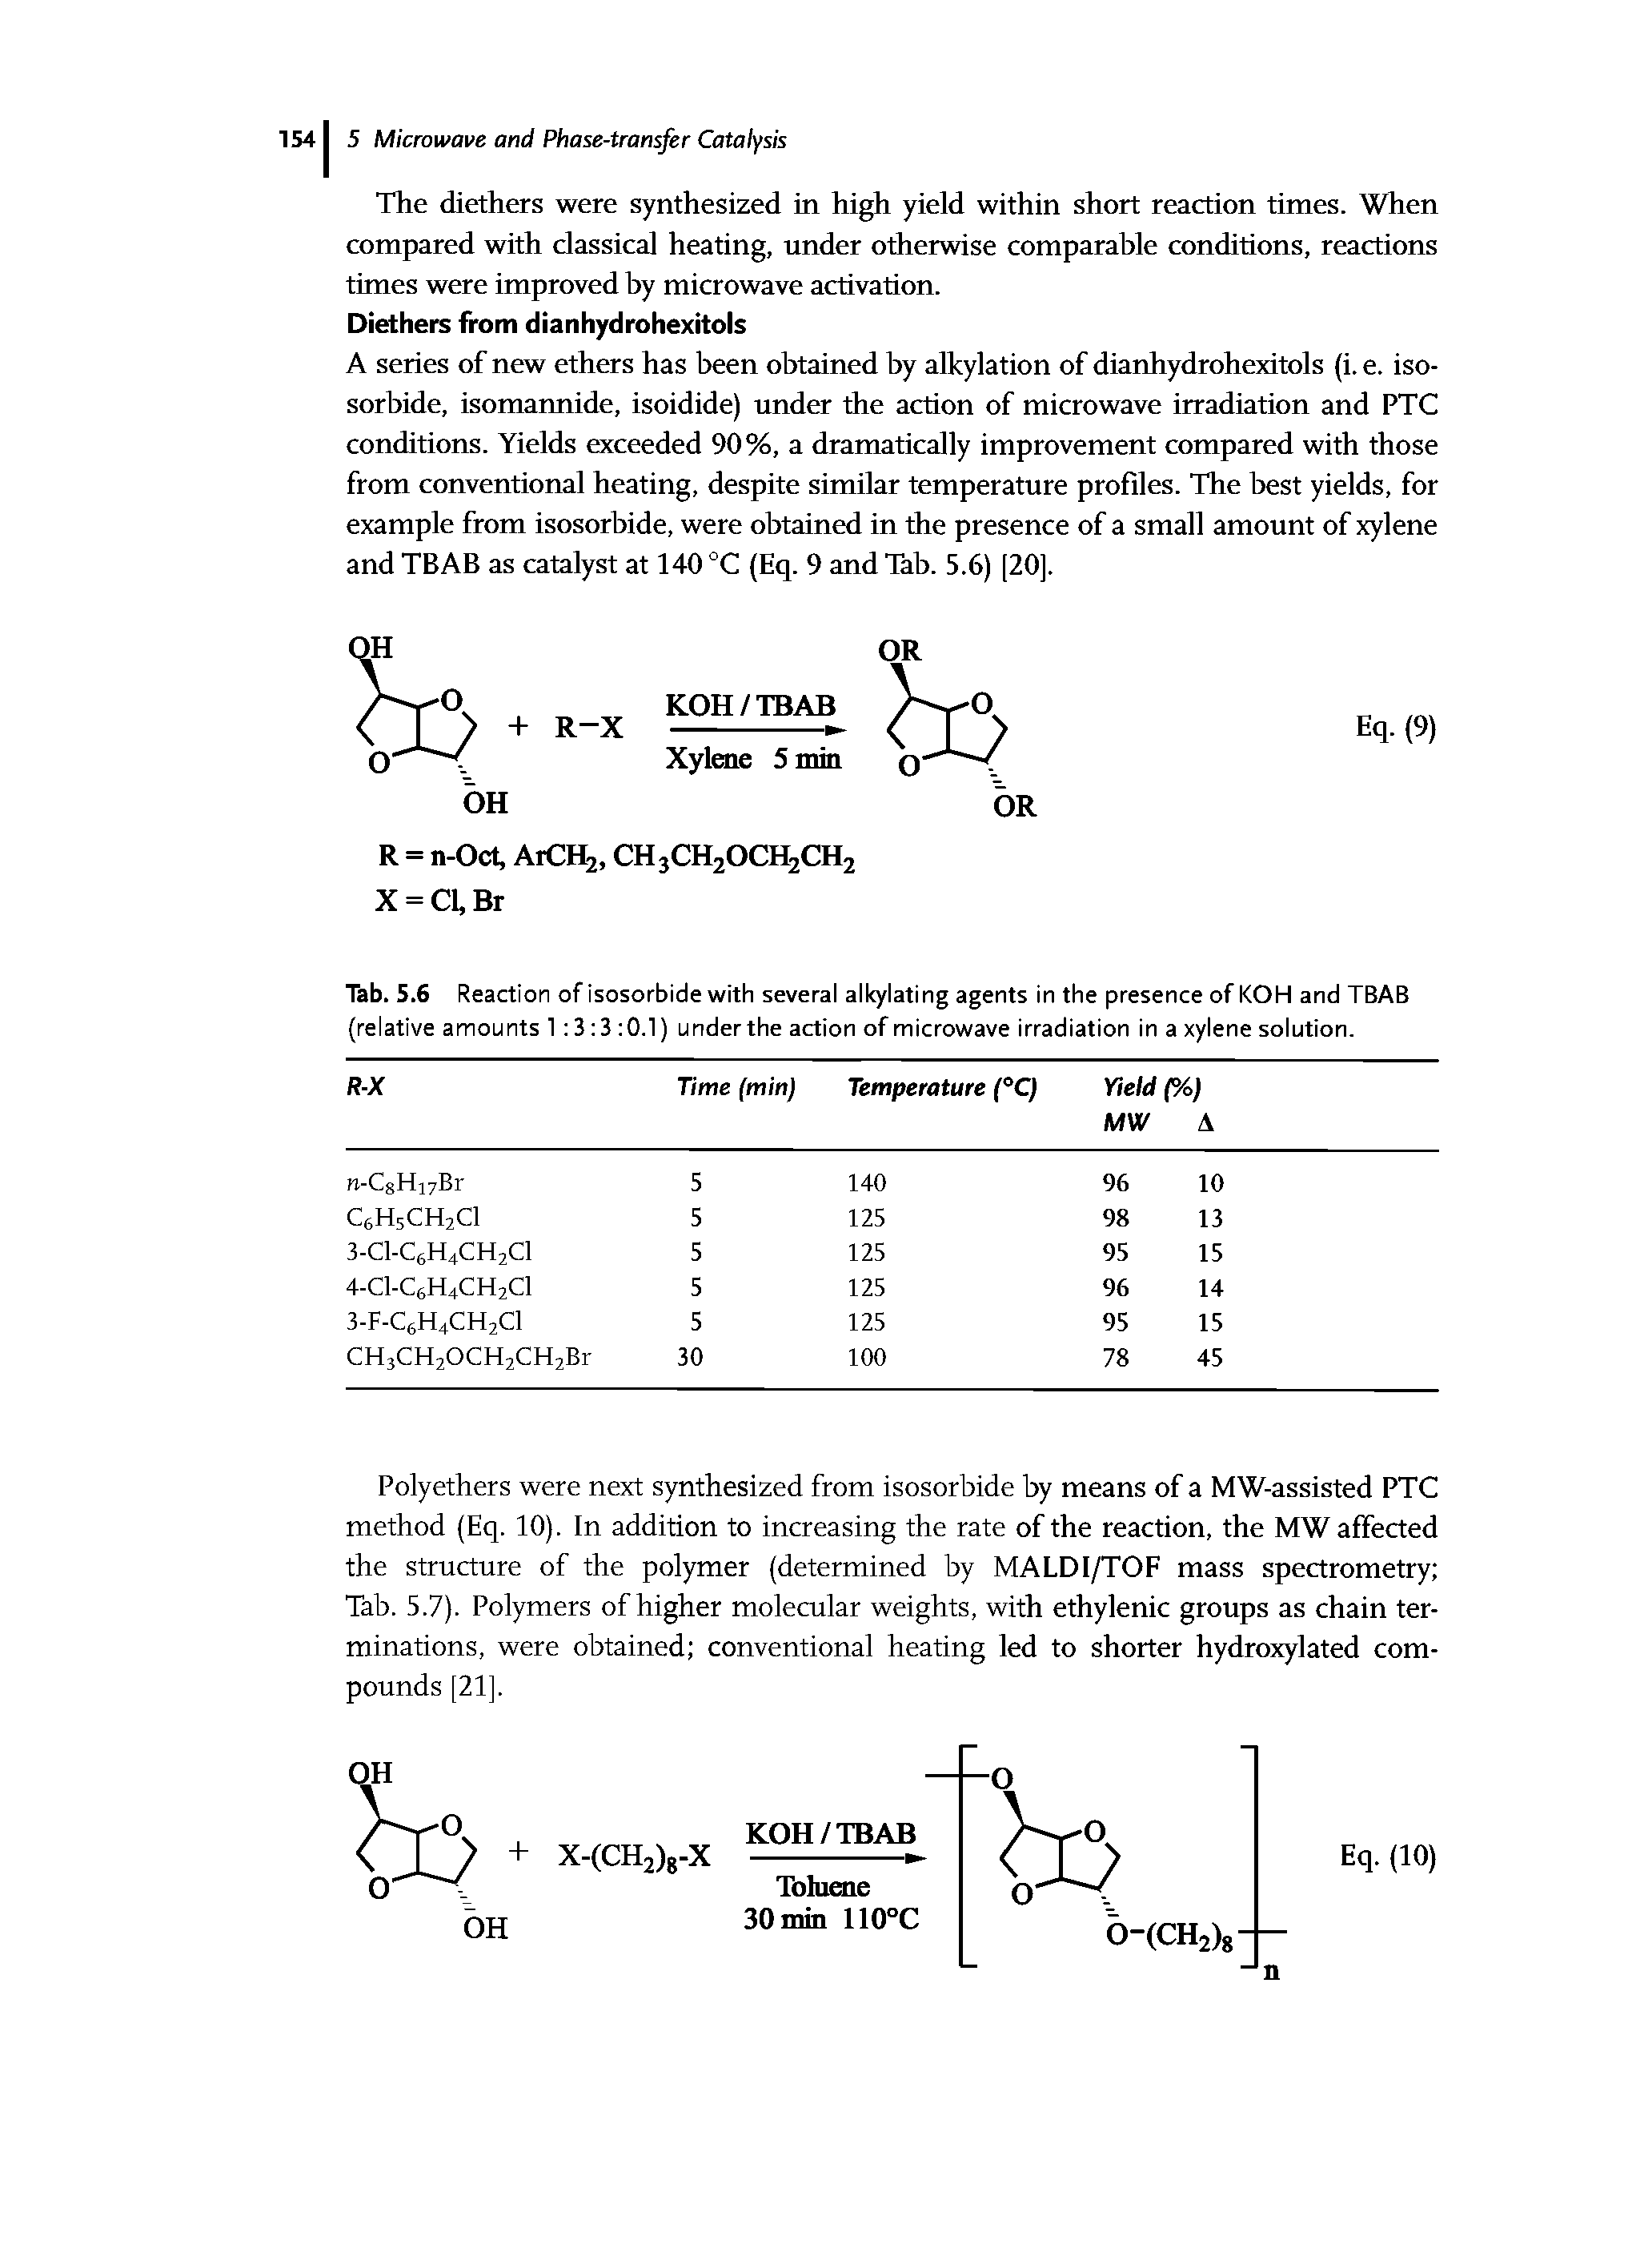 Tab. 5.6 Reaction of isosorbide with several alkylating agents in the presence of KOH and TBAB (relative amounts 1 3 3 0.1) under the action of microwave irradiation in a xylene solution.